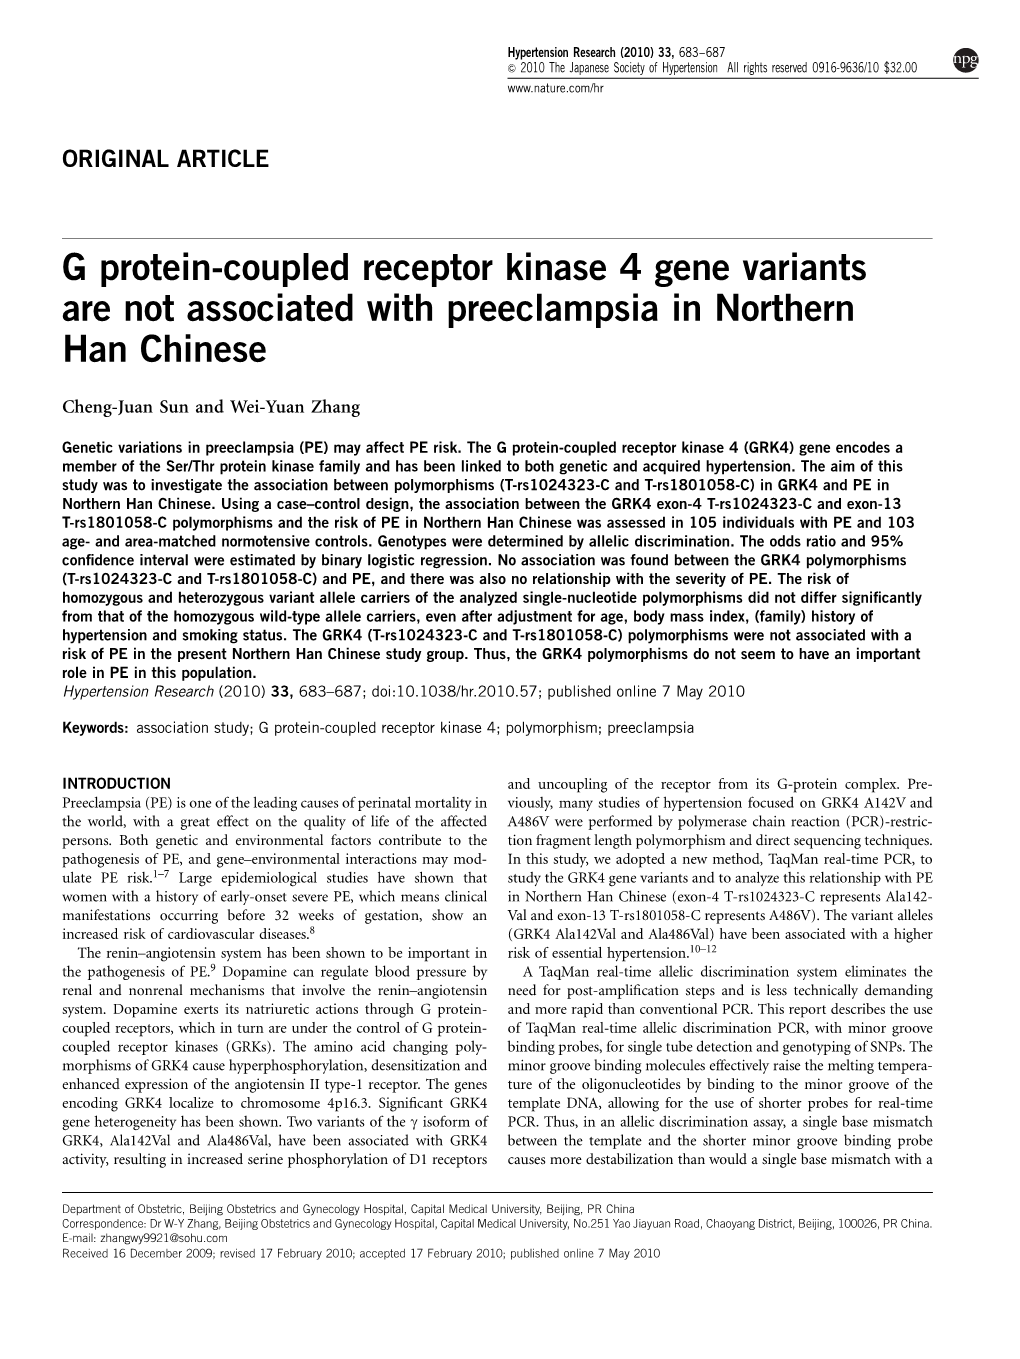 G Protein-Coupled Receptor Kinase 4 Gene Variants Are Not Associated with Preeclampsia in Northern Han Chinese